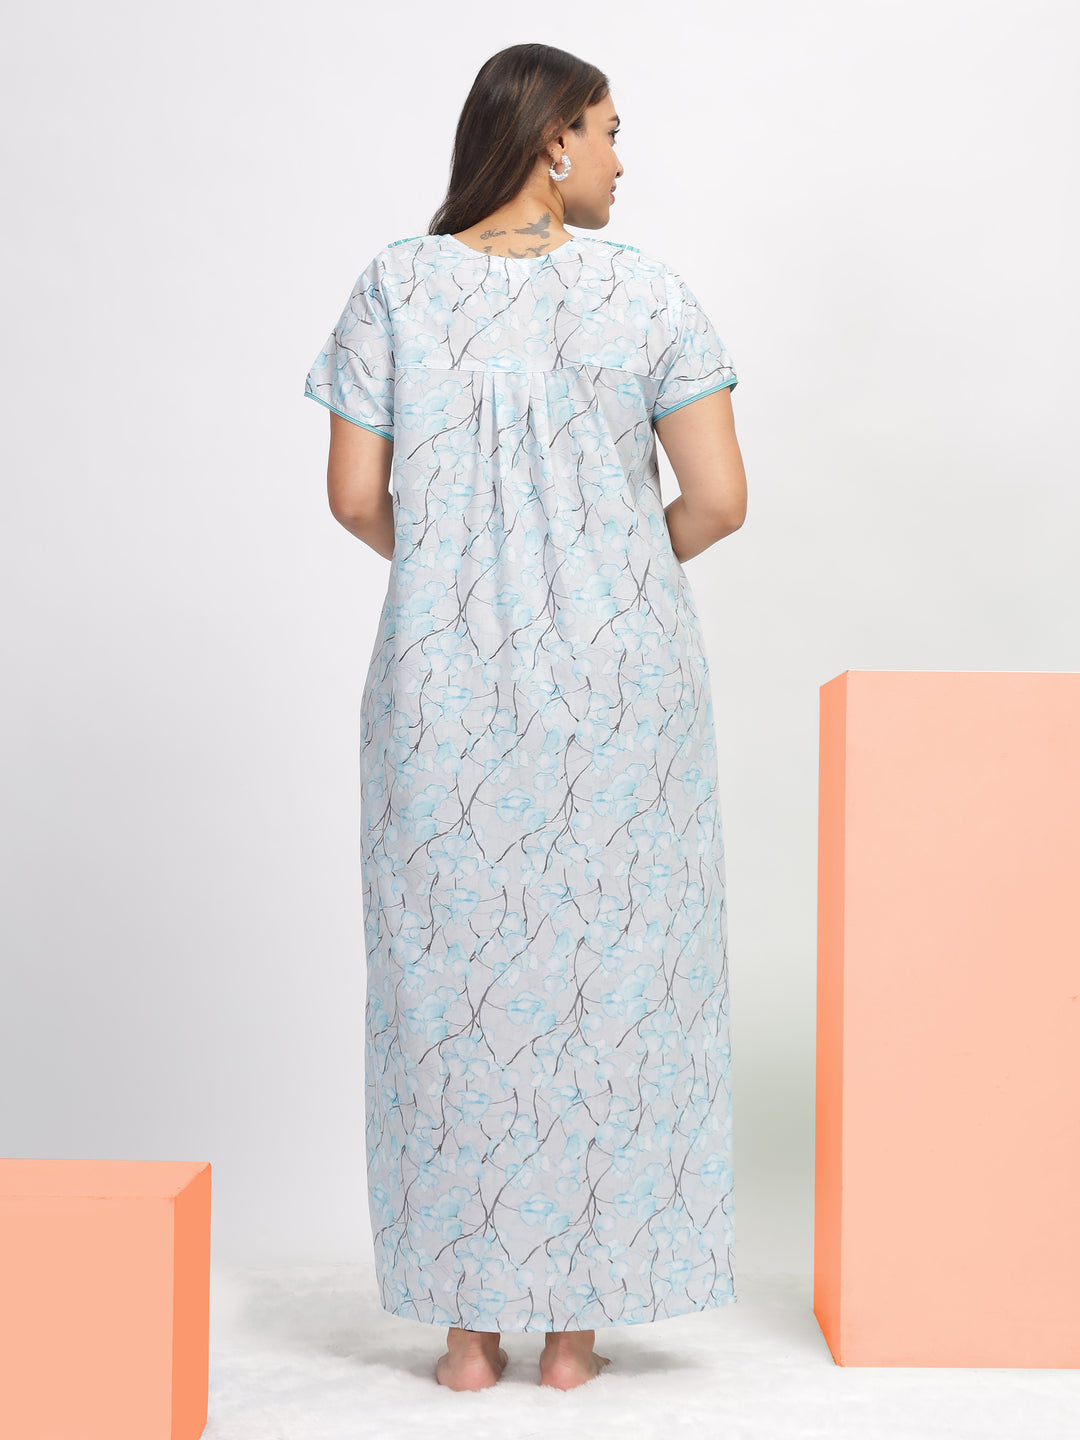 Blue Embroidered Nighty: Elegance in Every Stitch